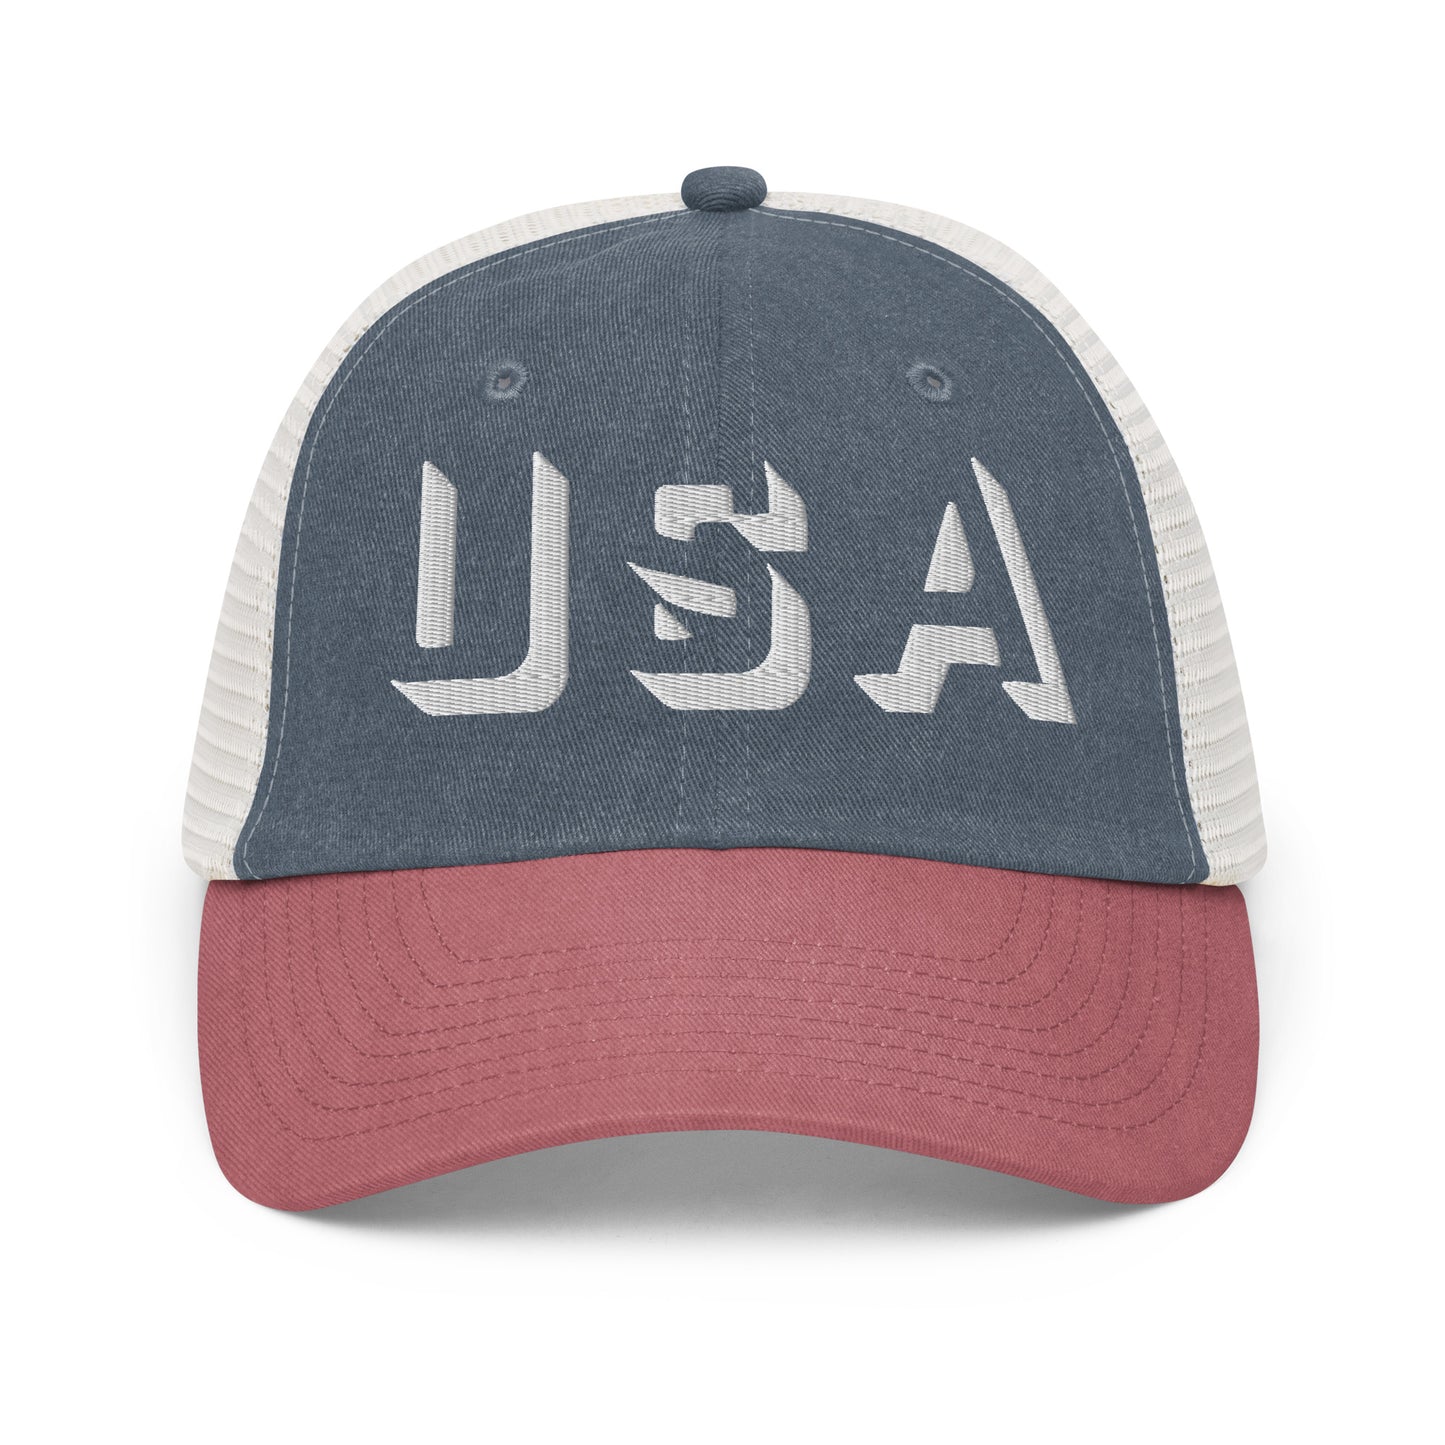 USA-dimensional-Pigment-dyed cap